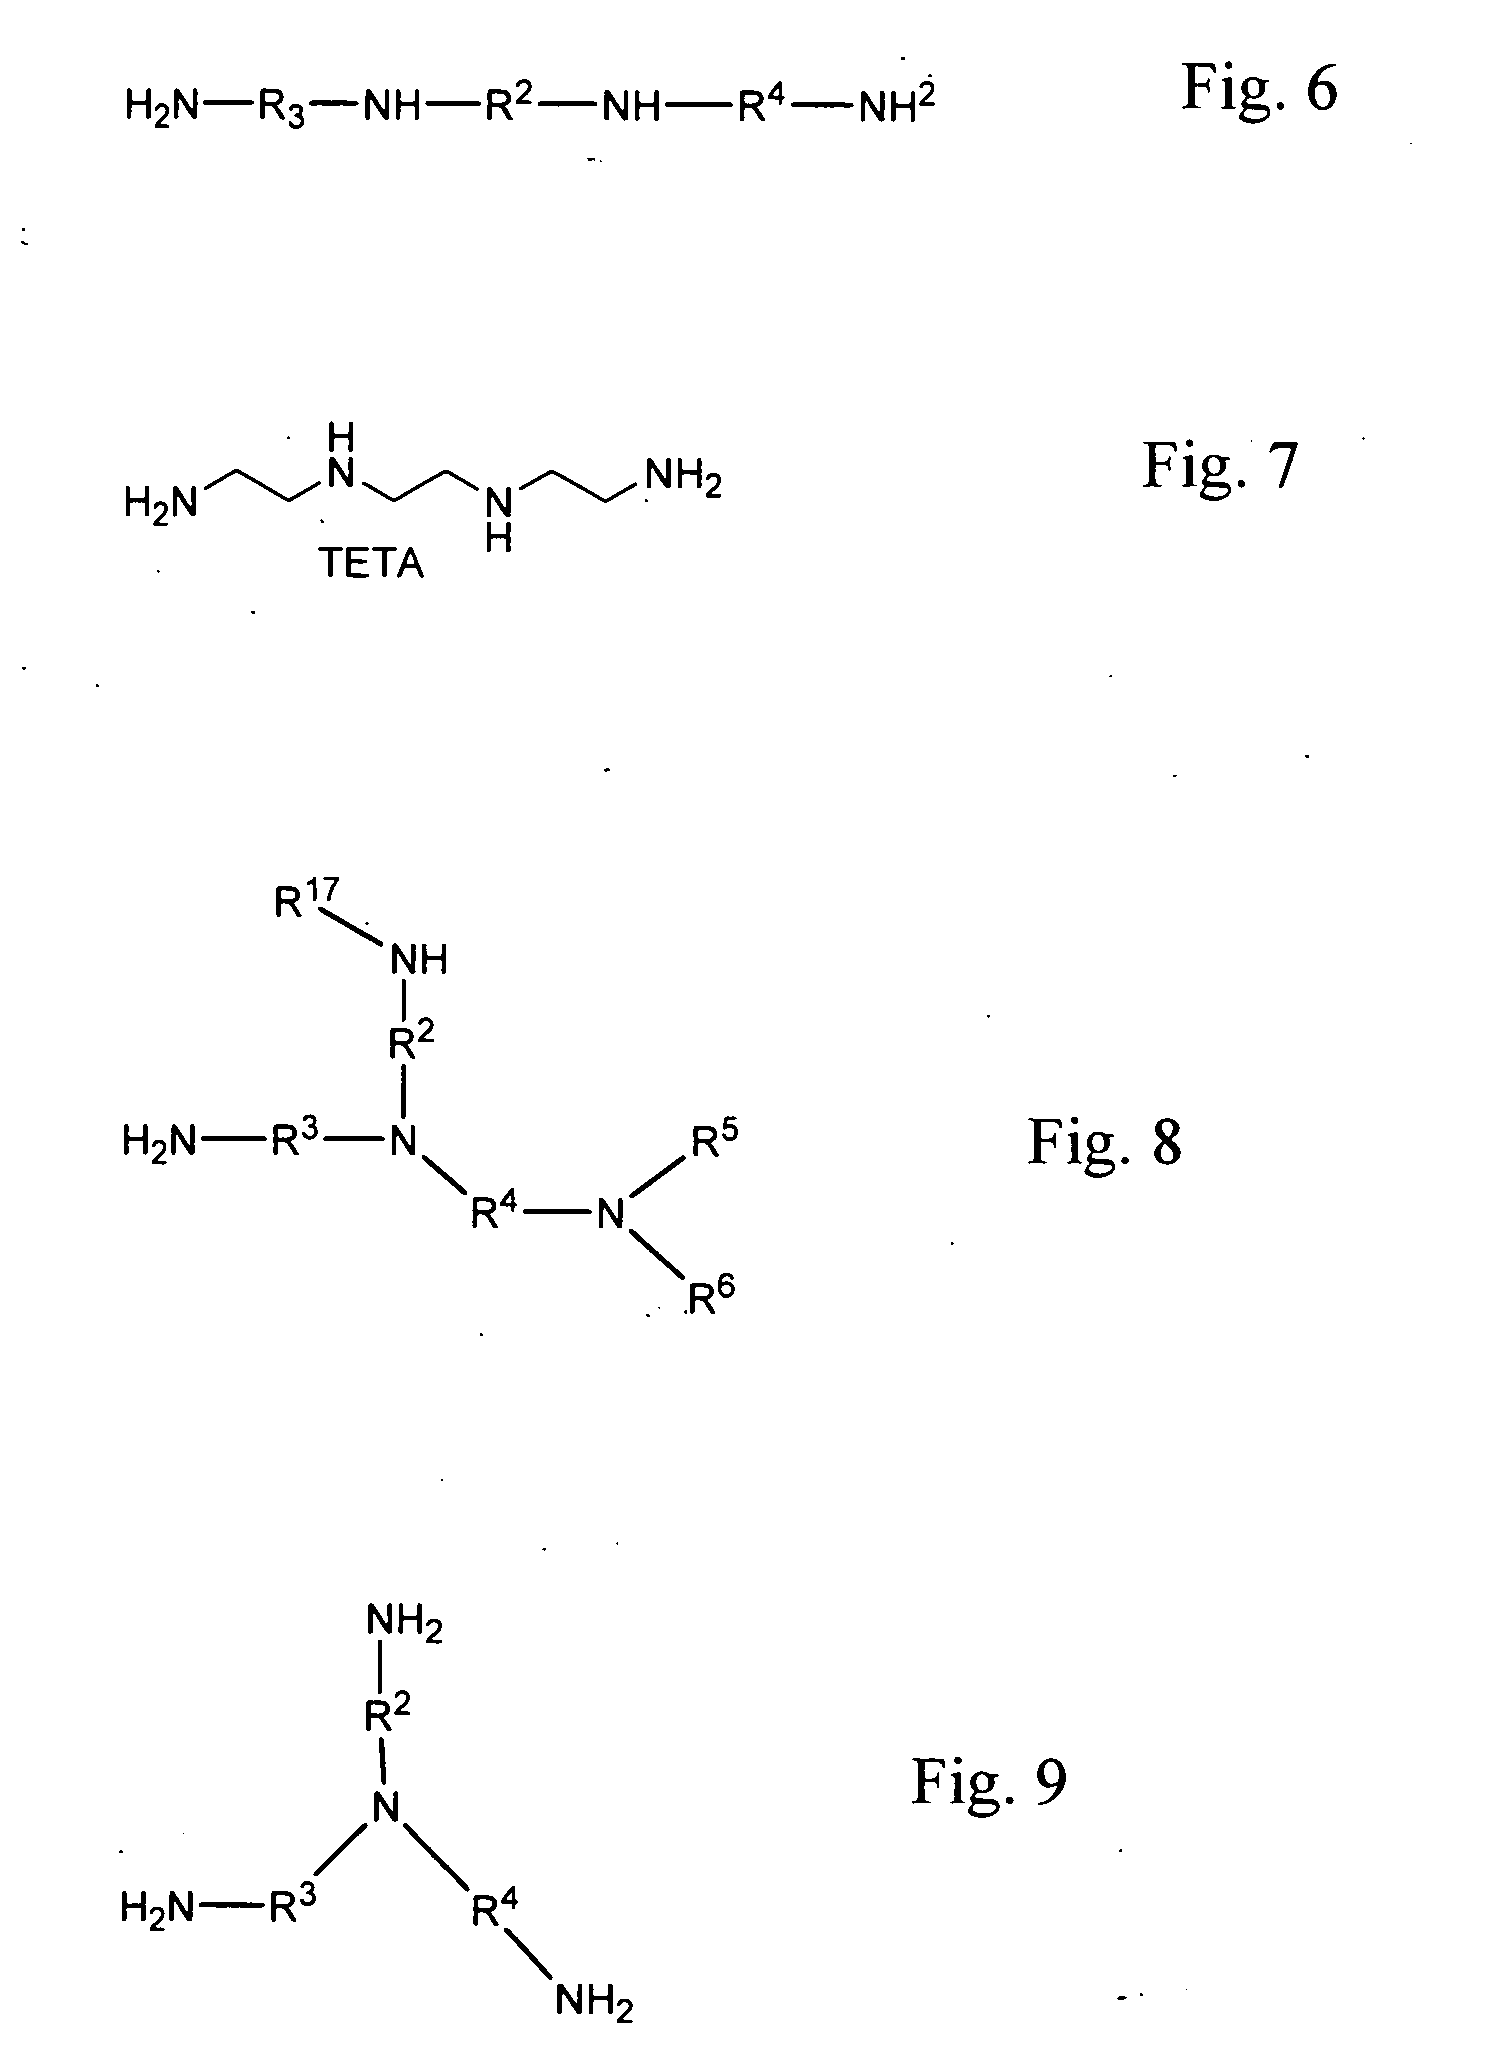 Methods of making cyclic, N-amino functional triamines